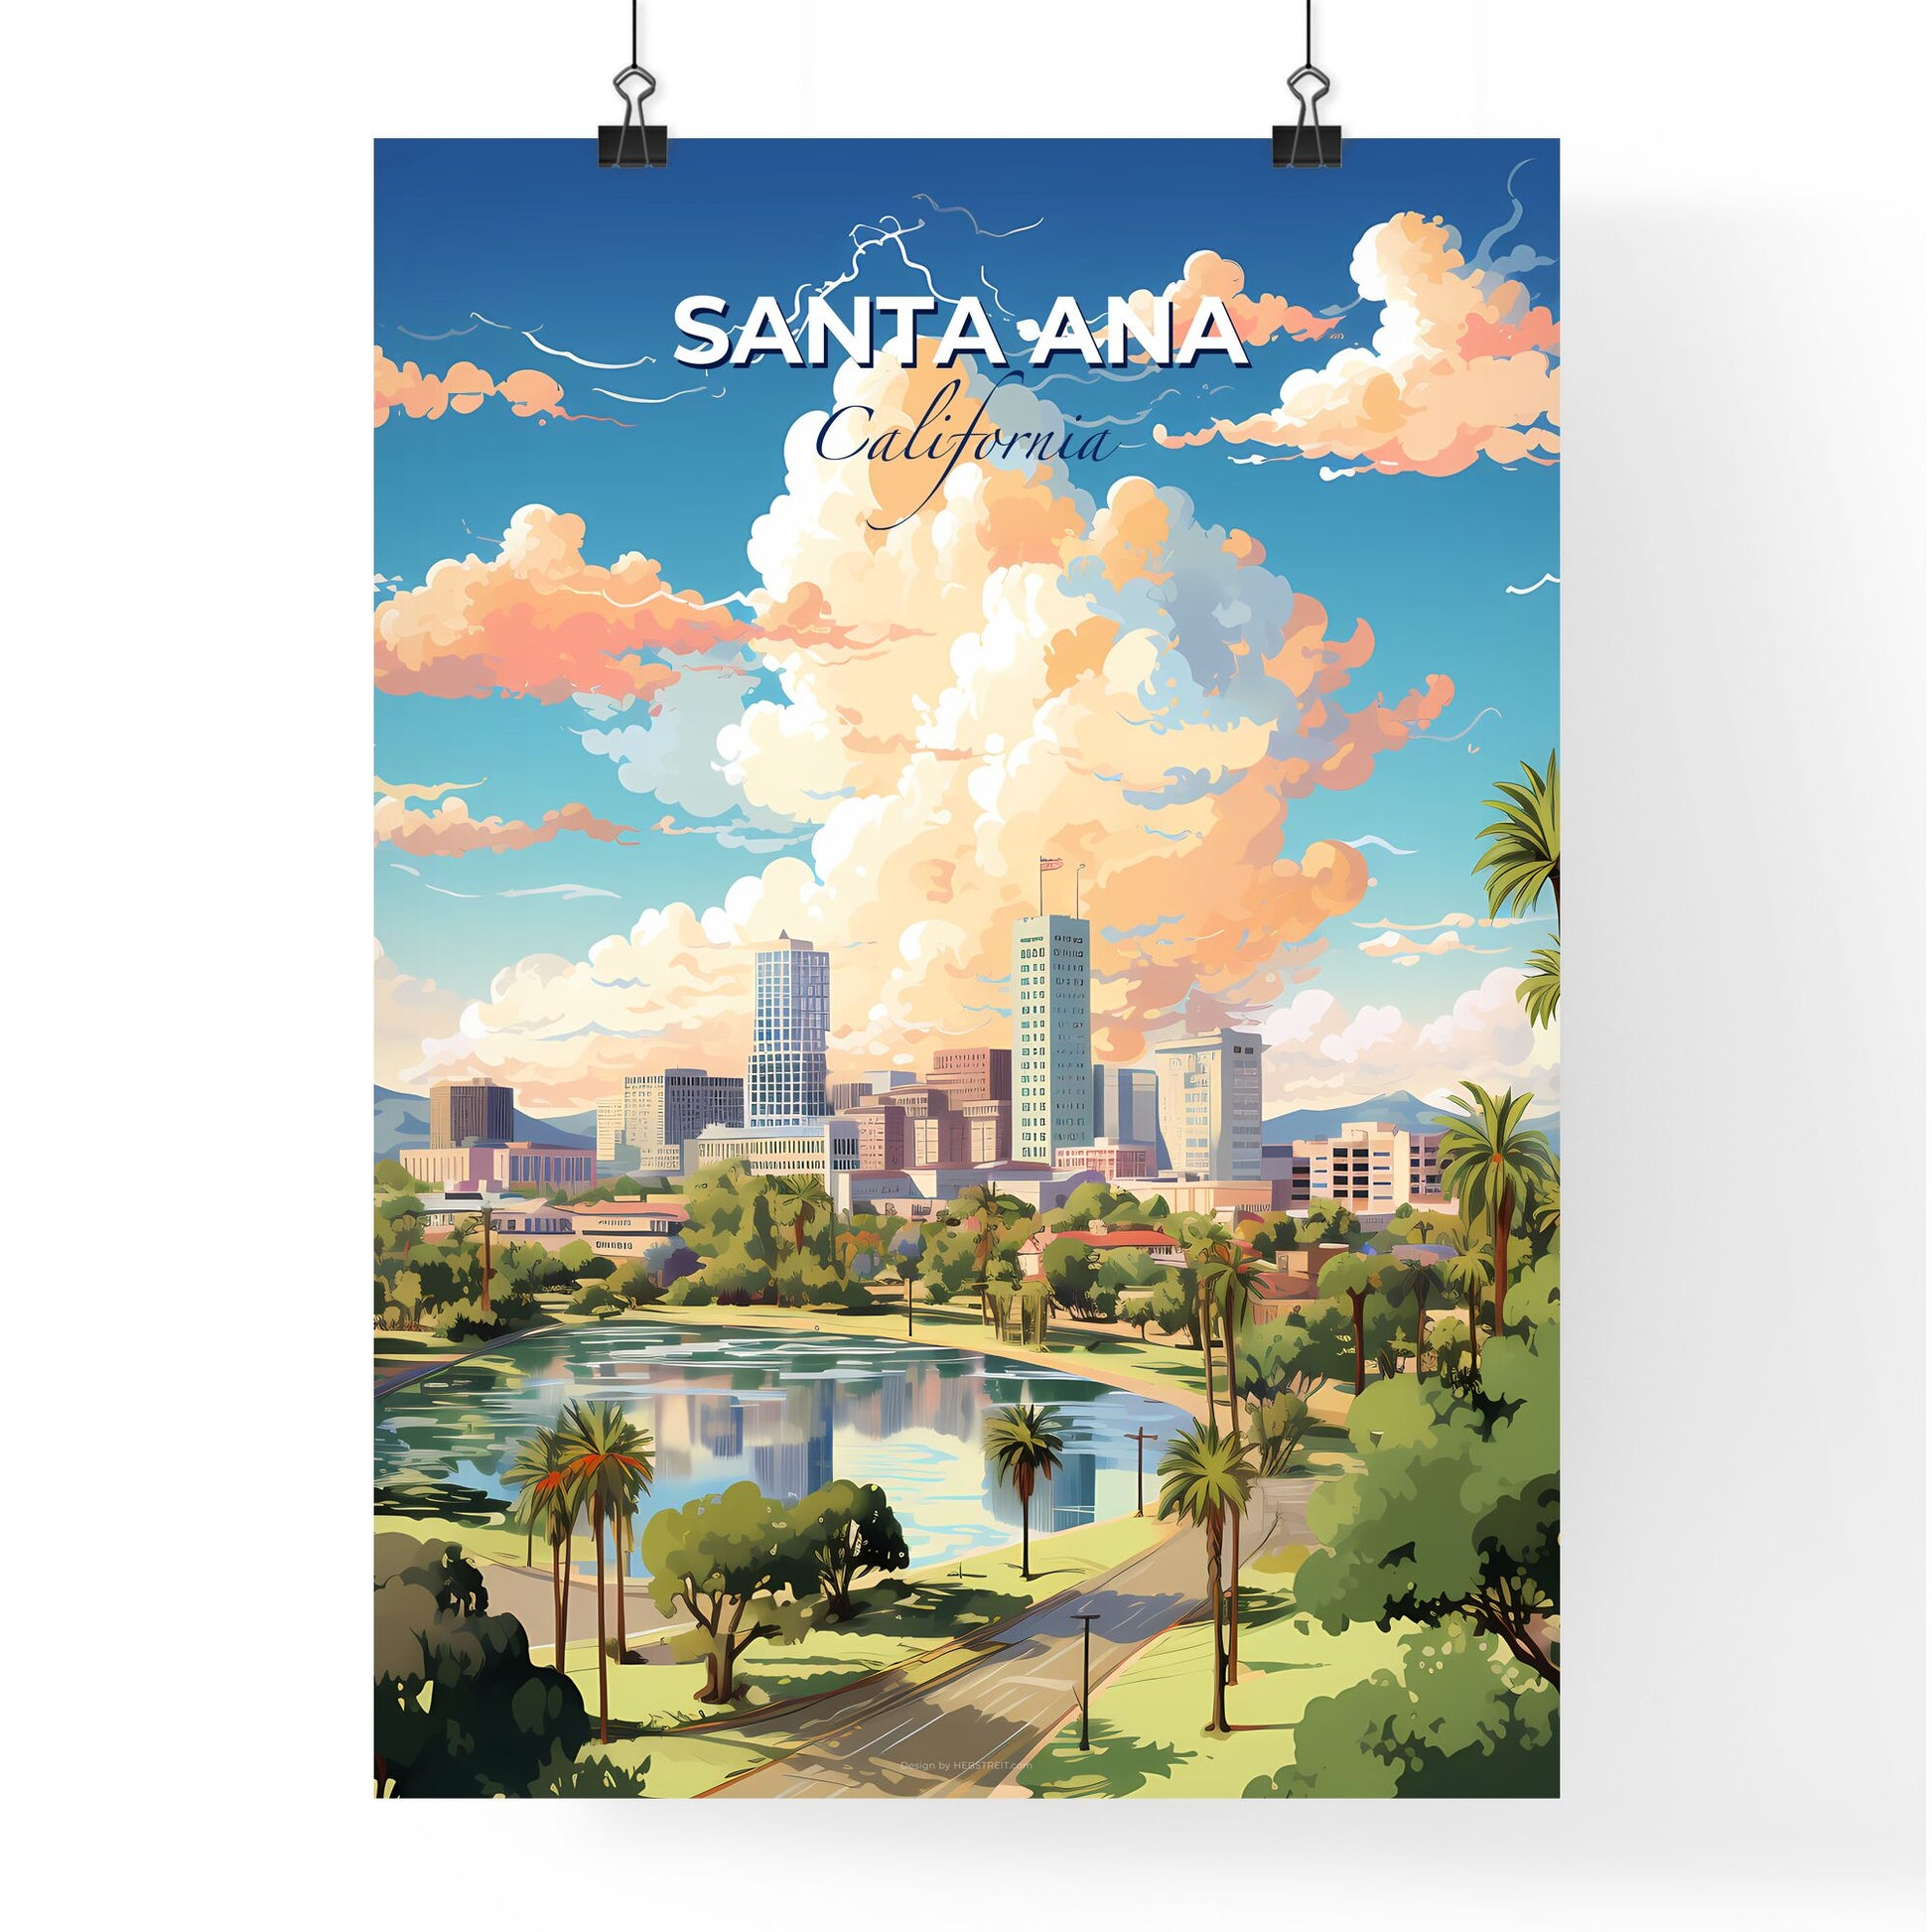 Santa Ana California Skyline - A City With Trees And A Lake - Customizable Travel Gift Default Title